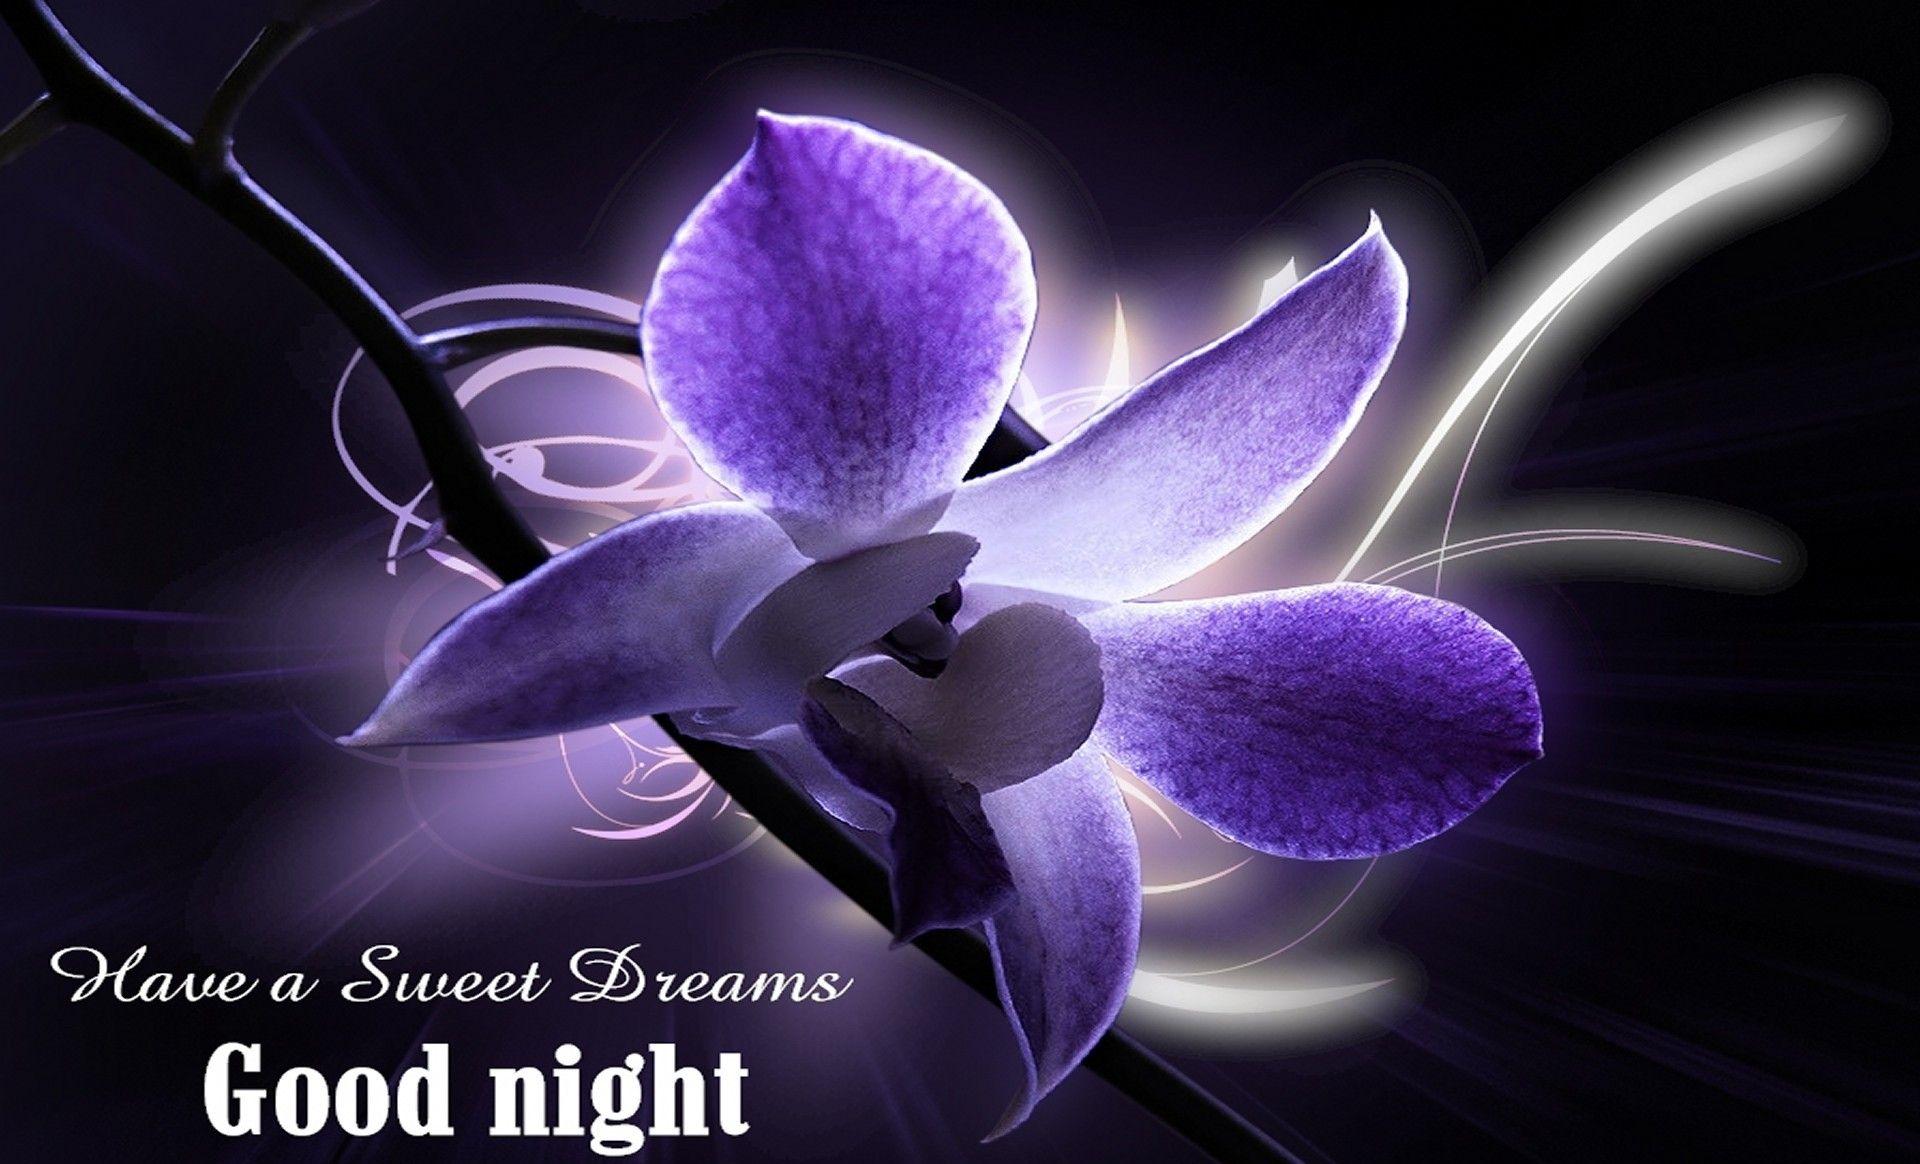 Download free good night sweet dreams wallpaper for Whats app